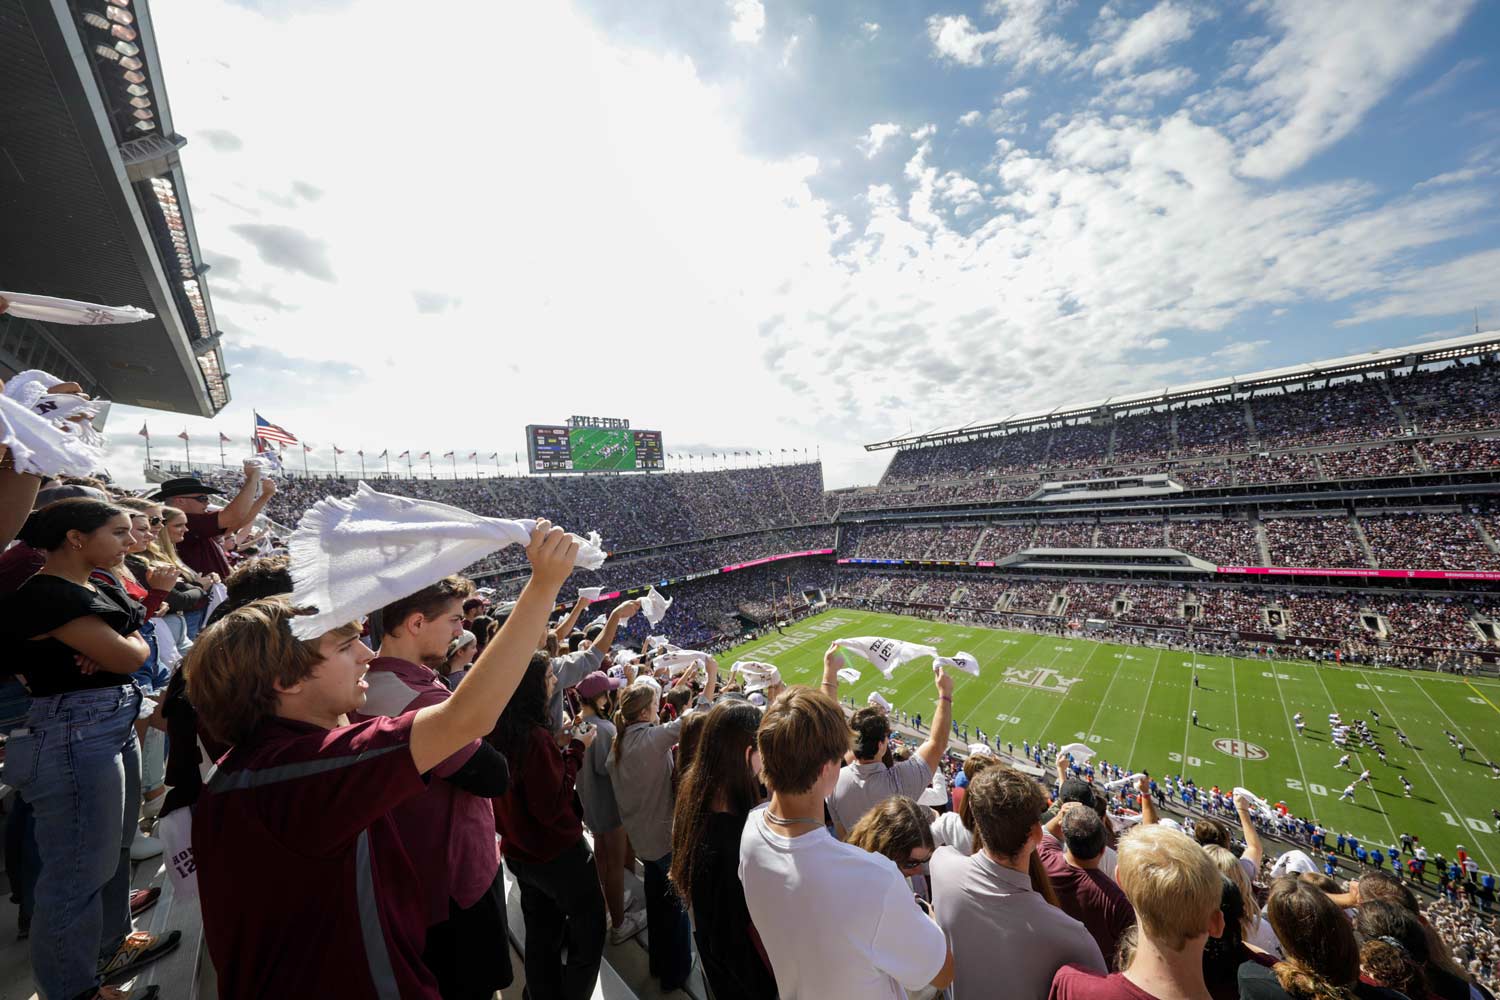 A view of Kyle Field from within the 91短视频 student section